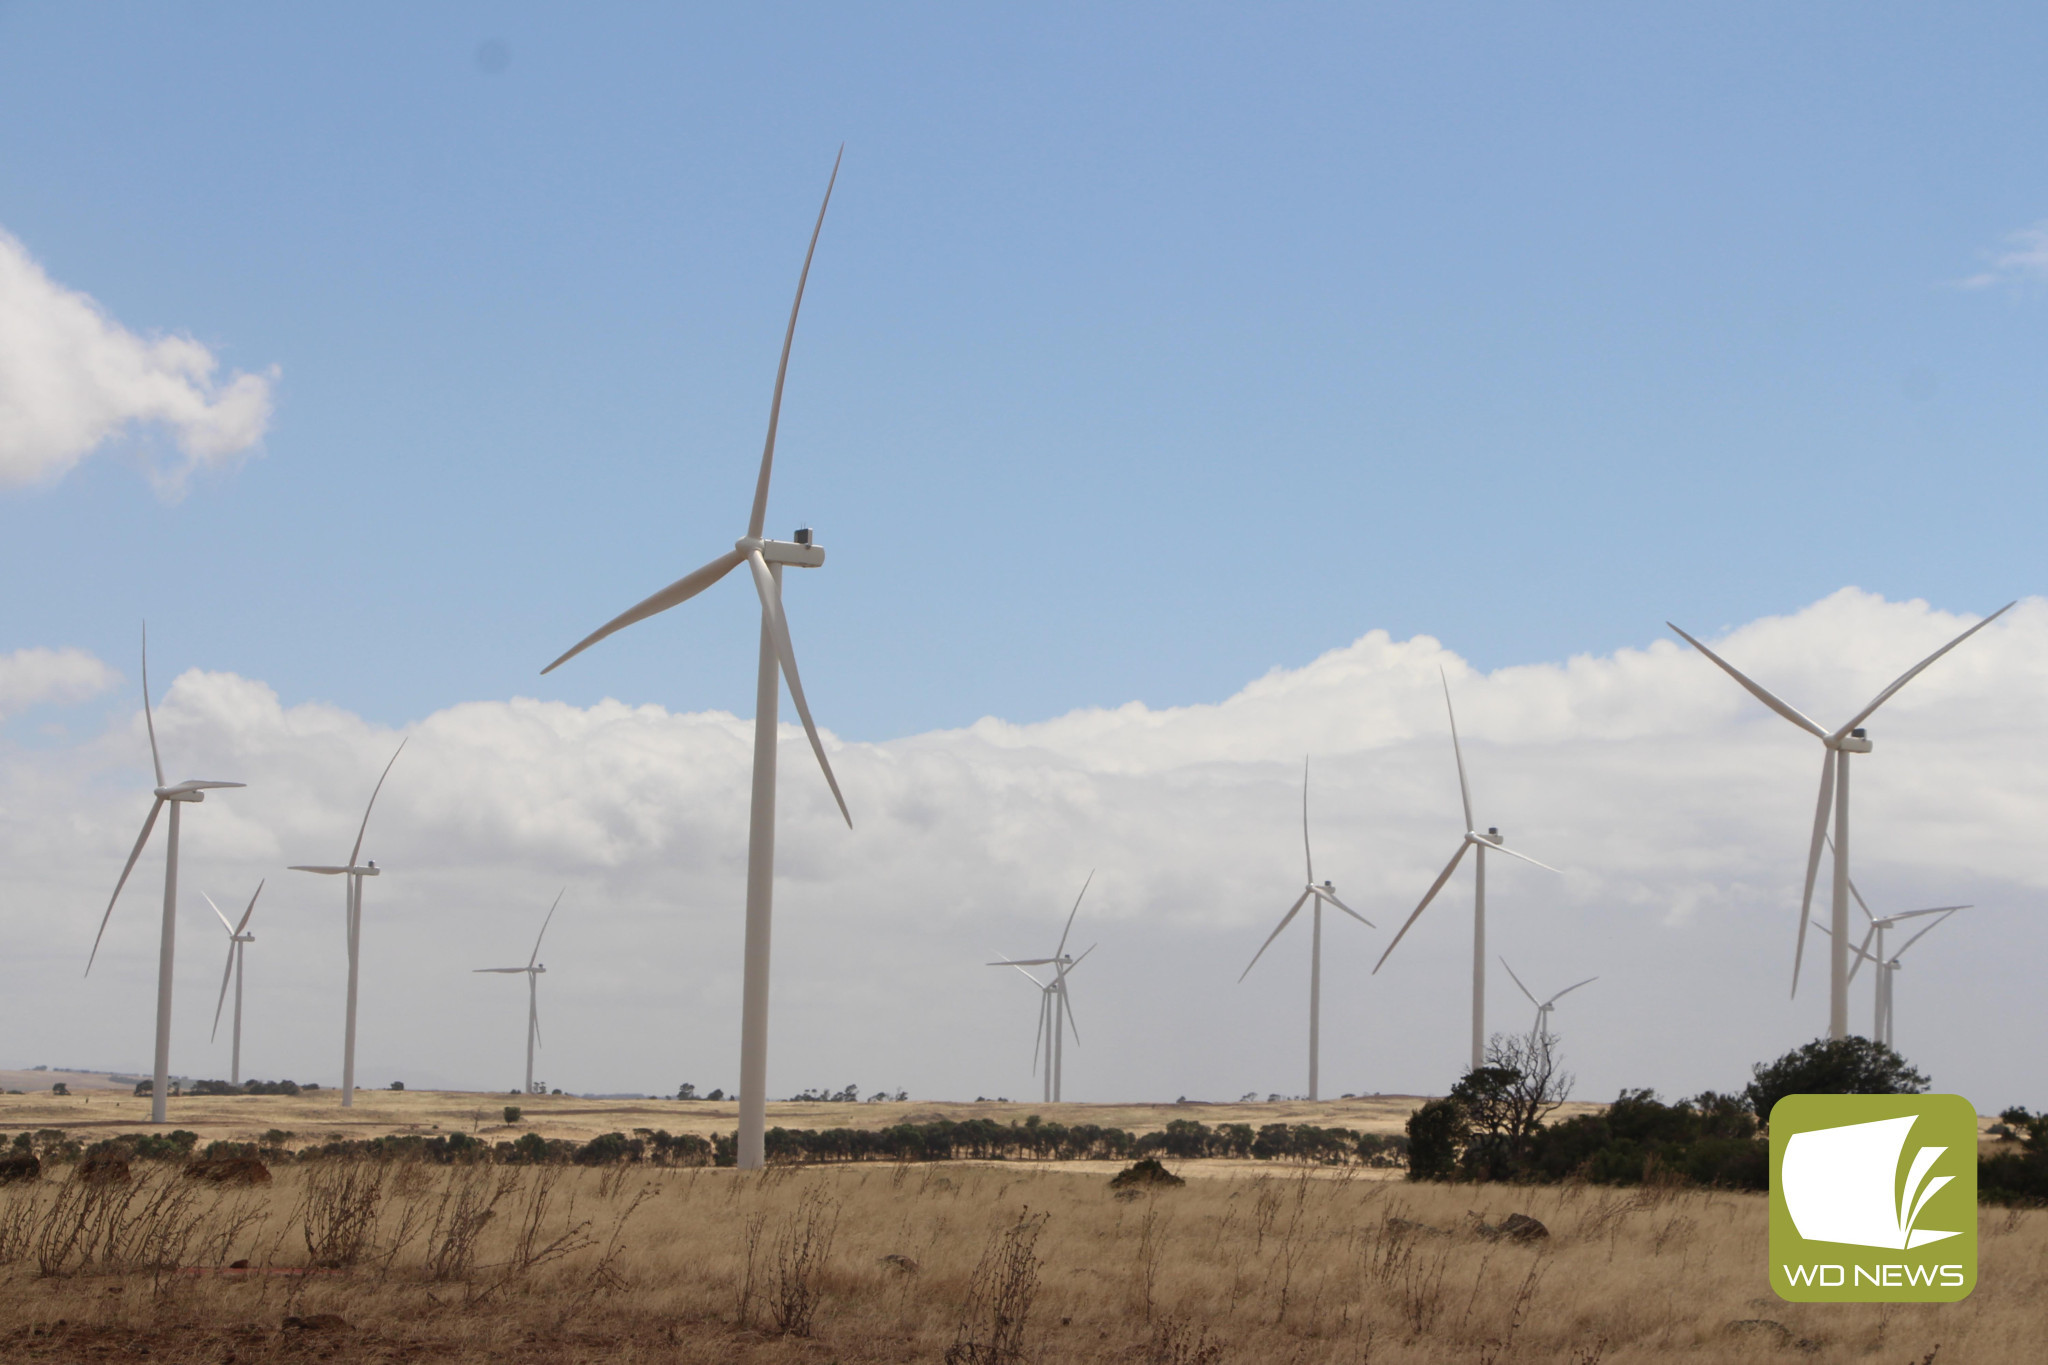 Concerns raised: After the Victorian Government announced an accelerated planning pathway for renewables, Moyne Shire Council mayor Ian Smith expressed concern the streamlined process could leave the voices of the community unheard.